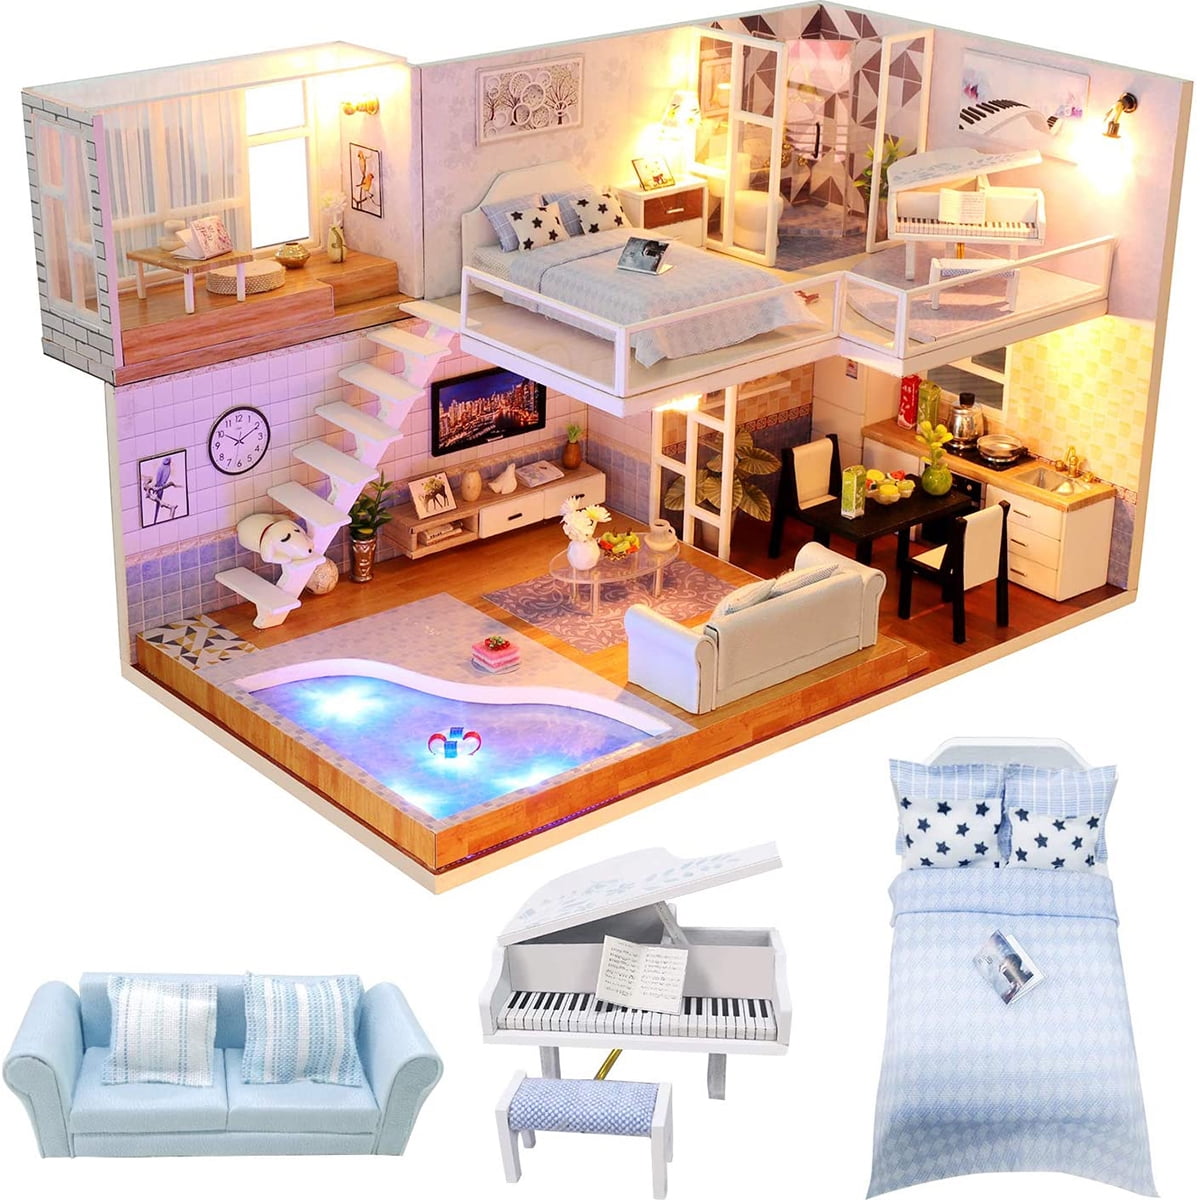 FILOL 1:12 Lovely Dollhouse Furniture Dollhouse Accessories Decor Flatering Paly Things Miniature Toy DIY Ornament Kit for Toddlers Girls Boys Pre-K 